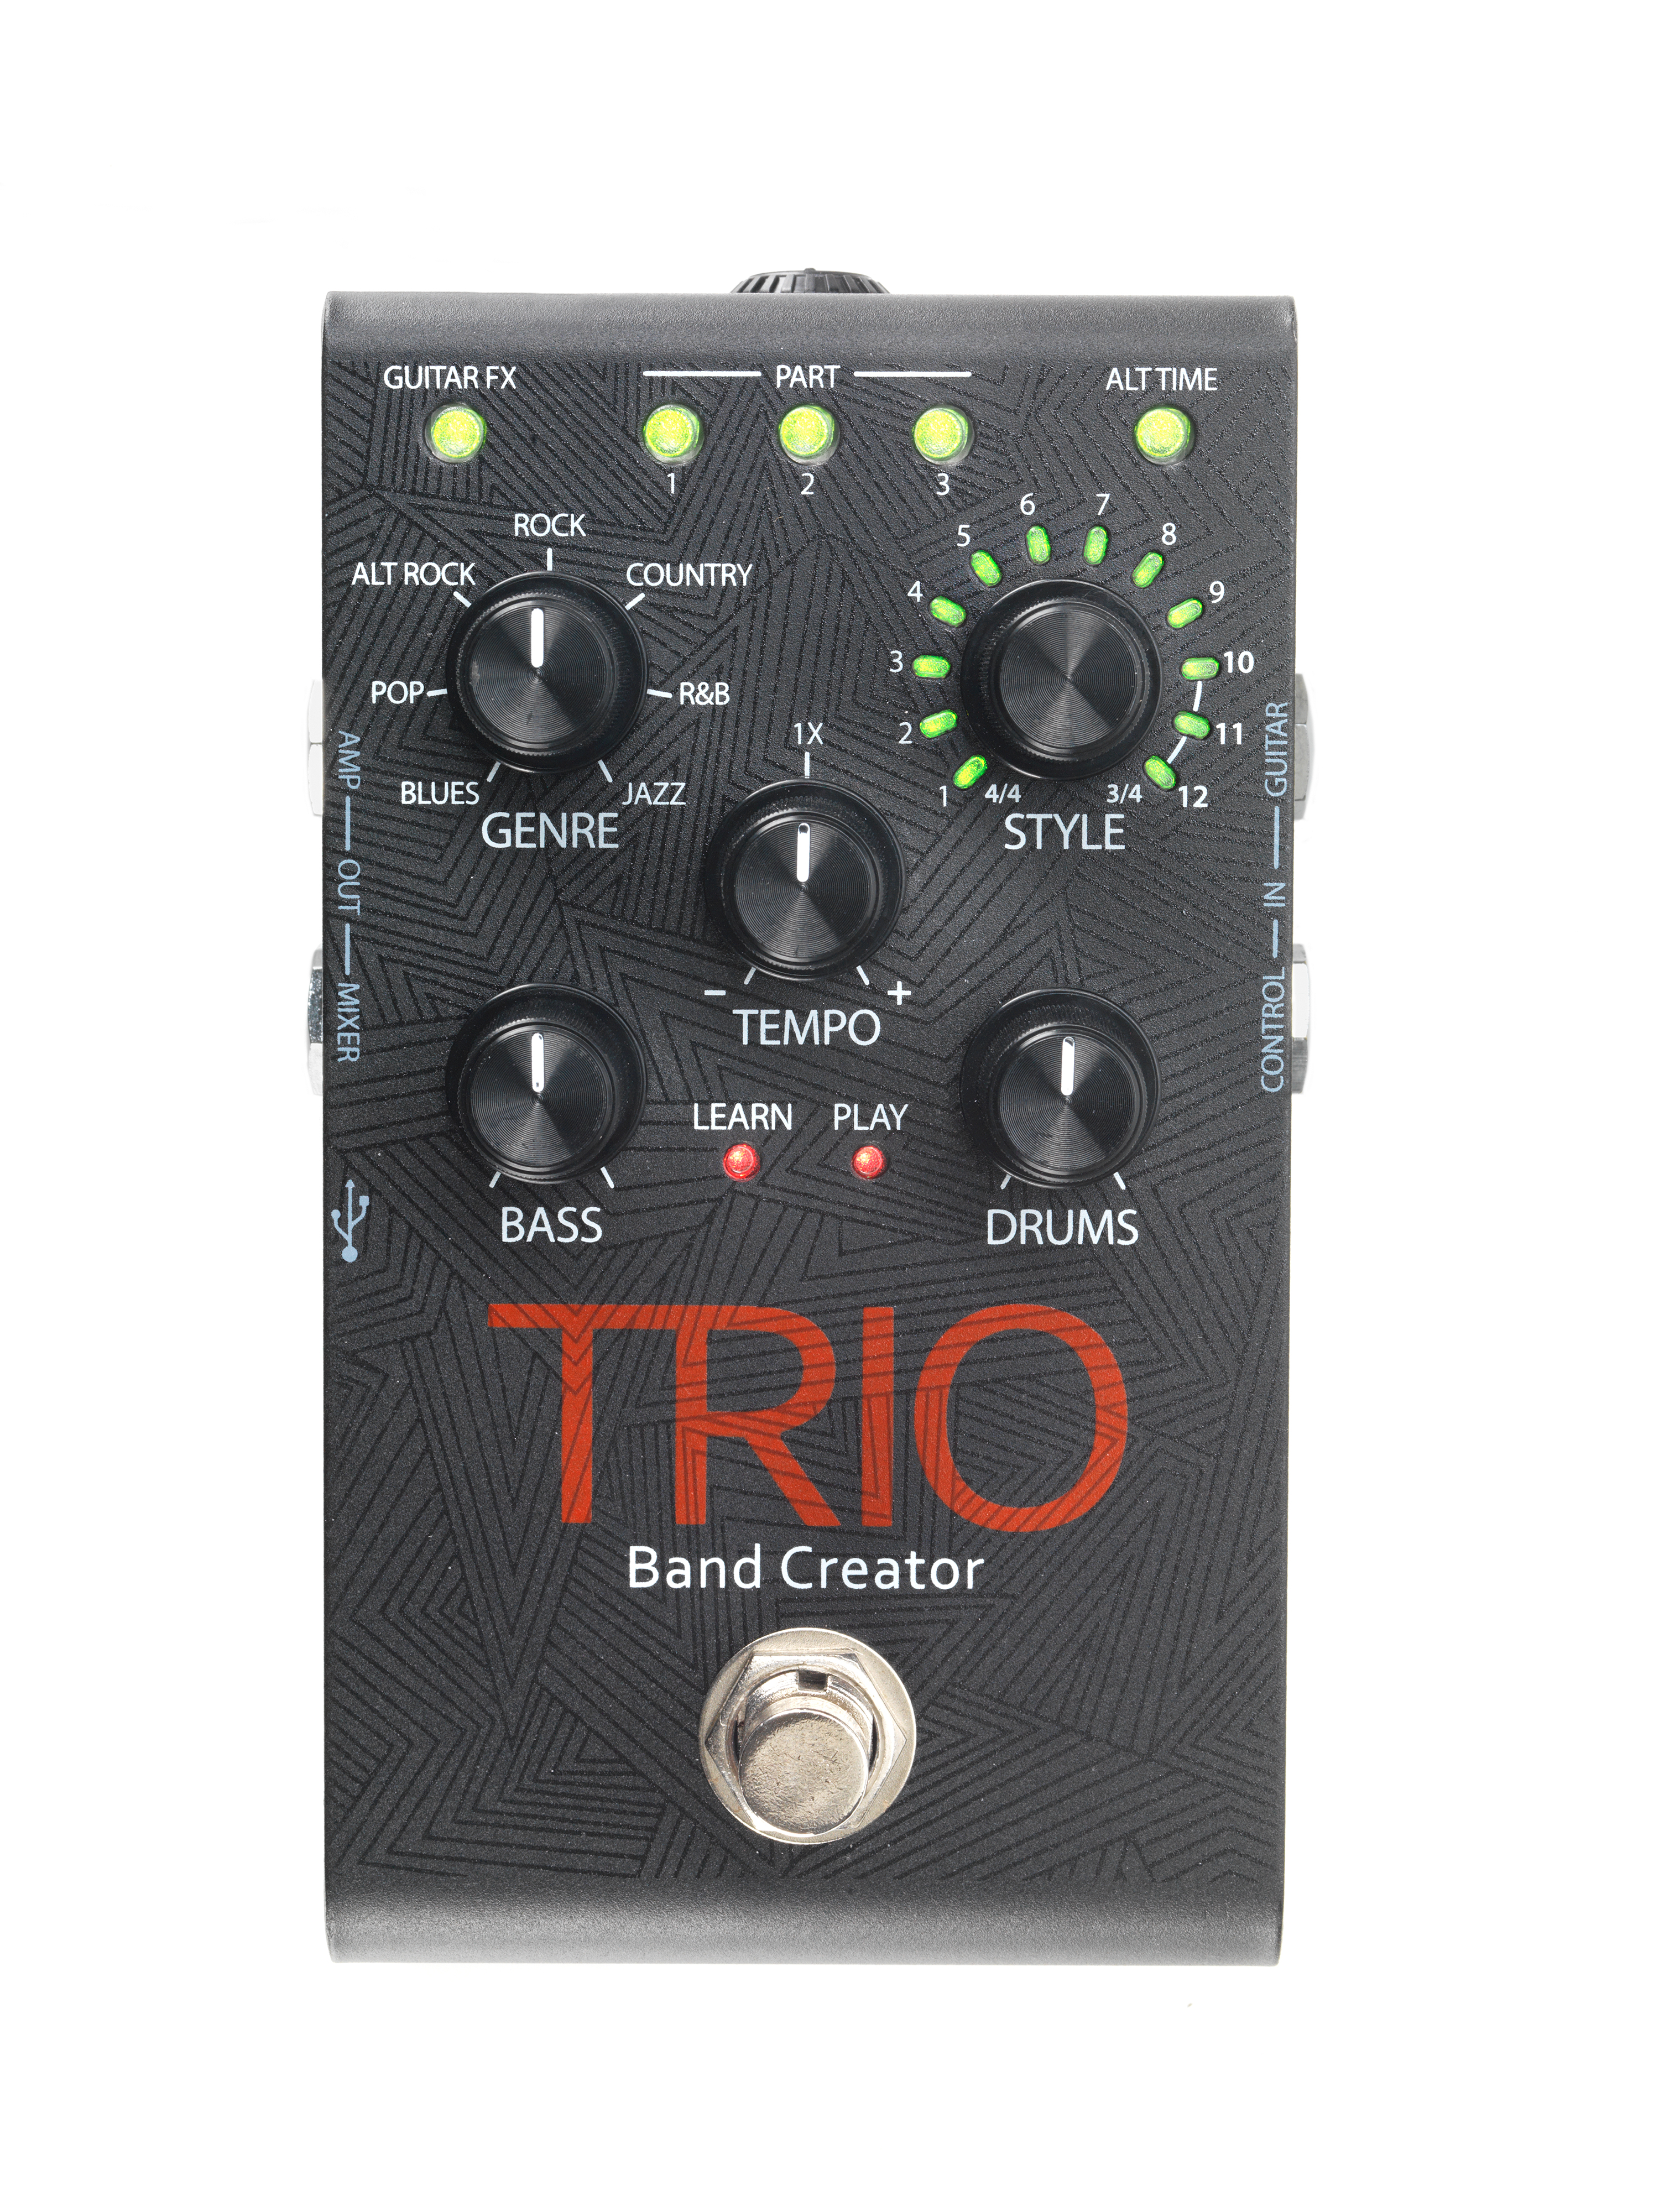 DigiTech TRIO Band Creator Takes “Best in Show” at NAMM 2015